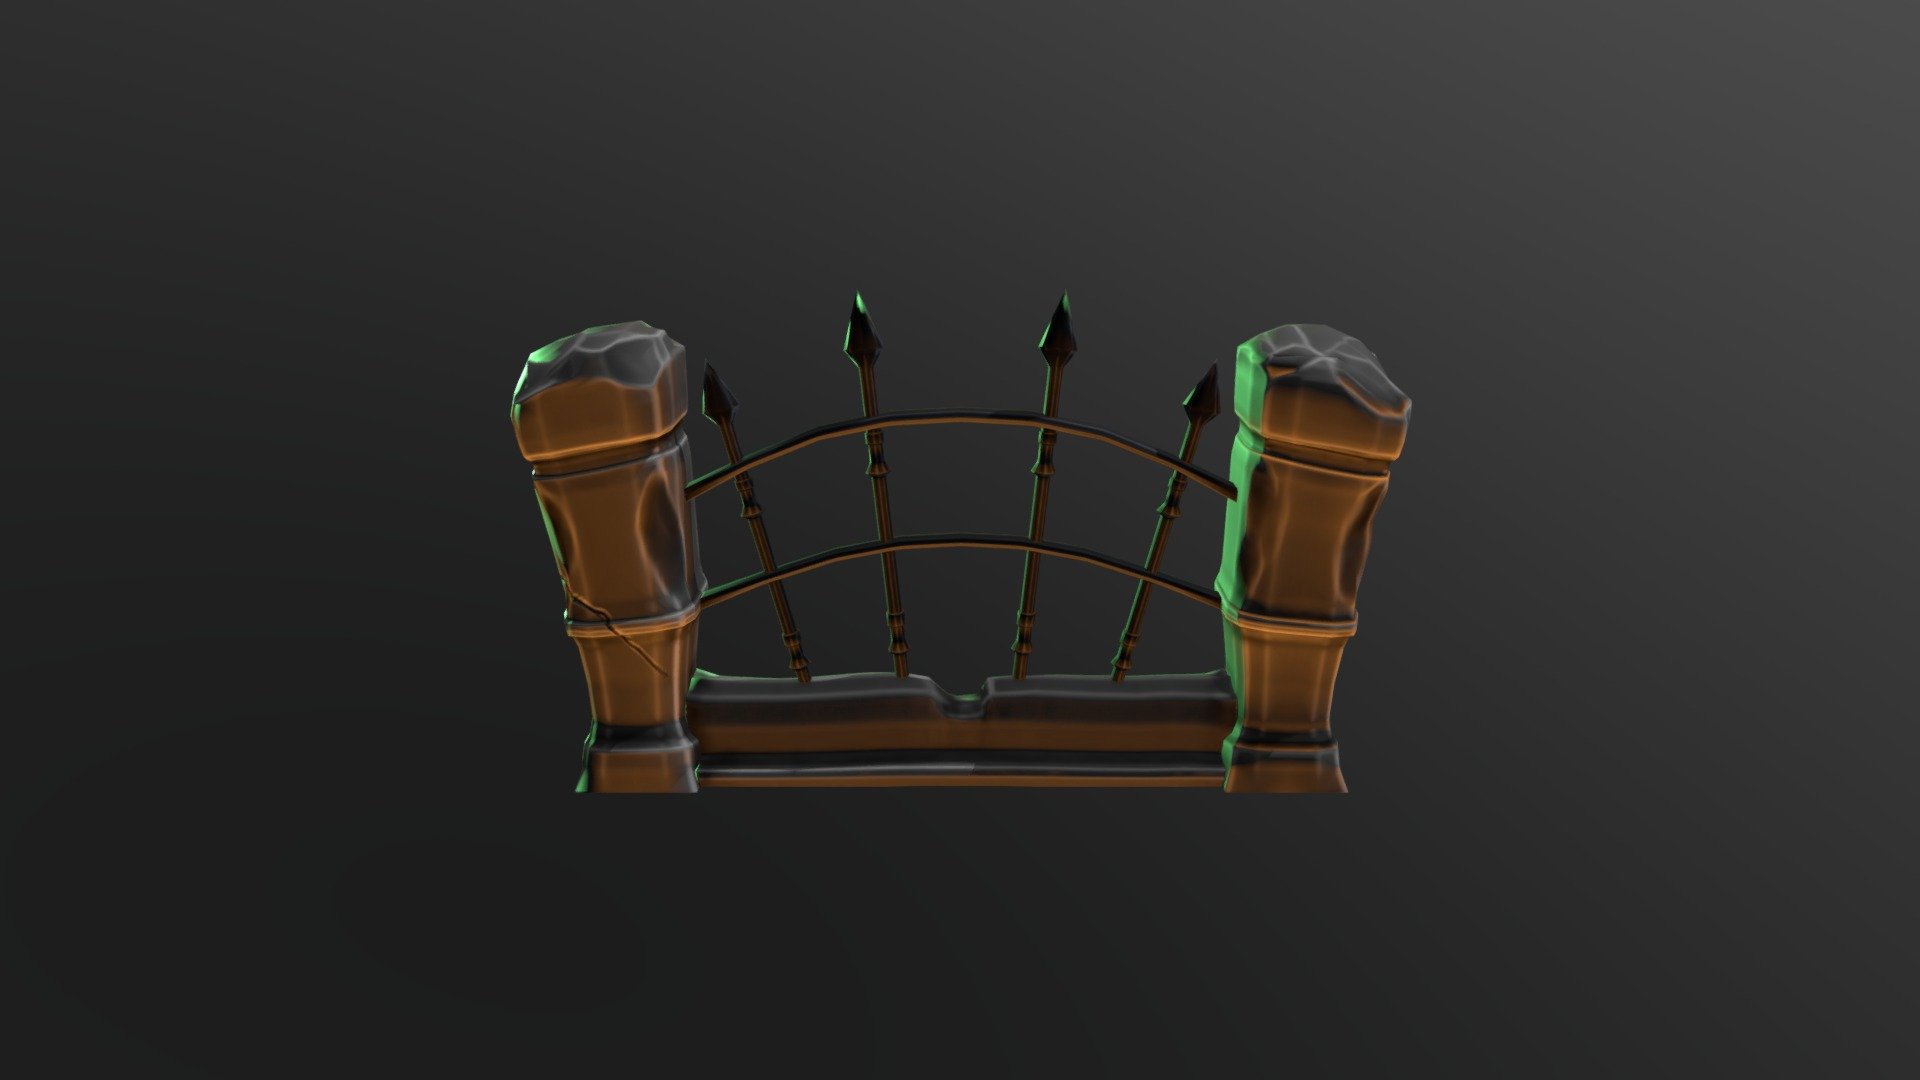 The gate I made for the graveyard scene for the game Church Grimm - Gate Low Poly - 3D model by Gyoza (@minabae) 3d model